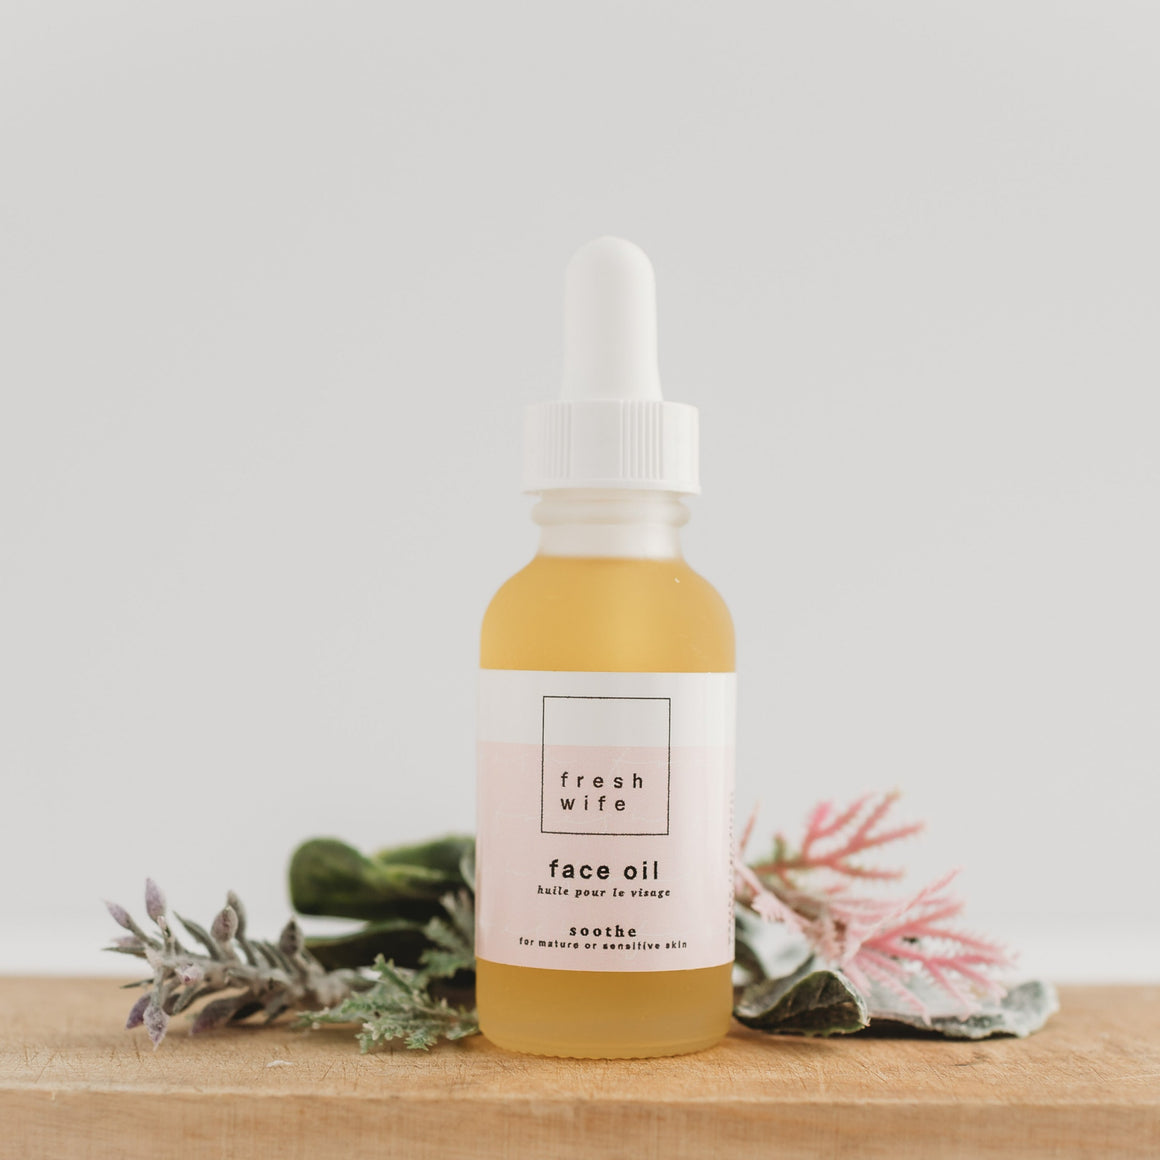 Face Oil - Soothe